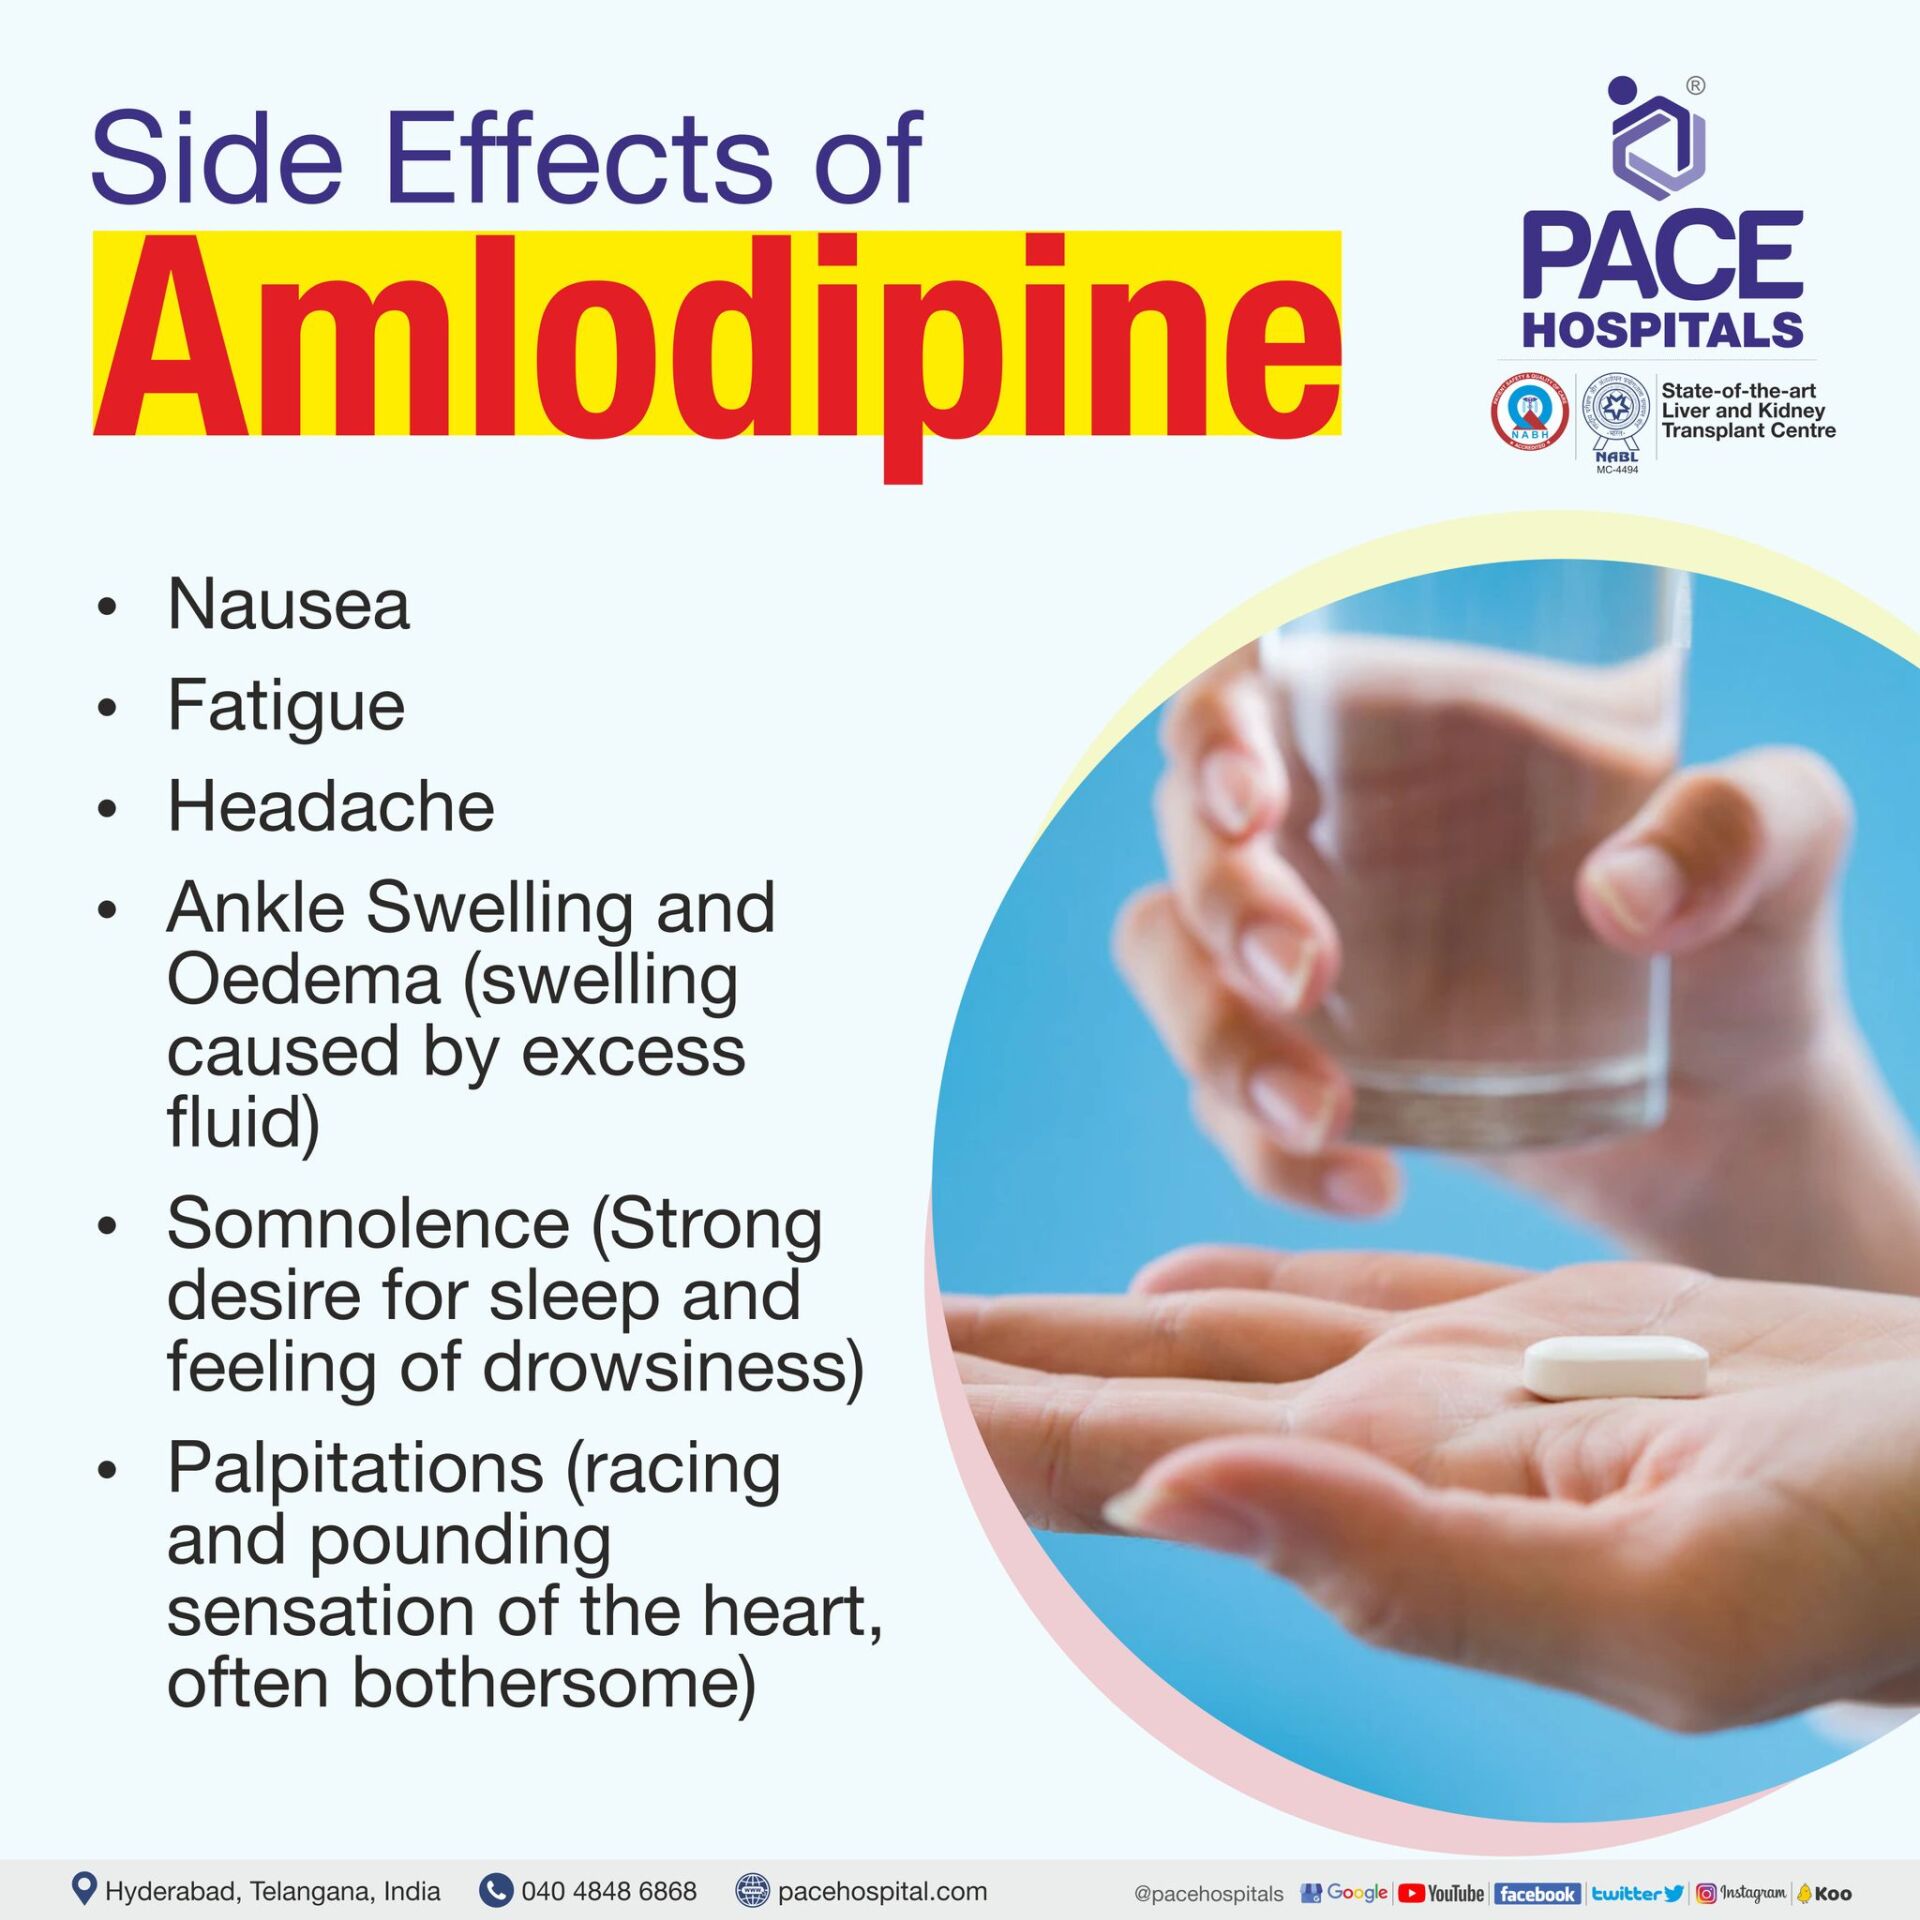 amlodipine side effects | amlodipine 5 mg tablet side effects